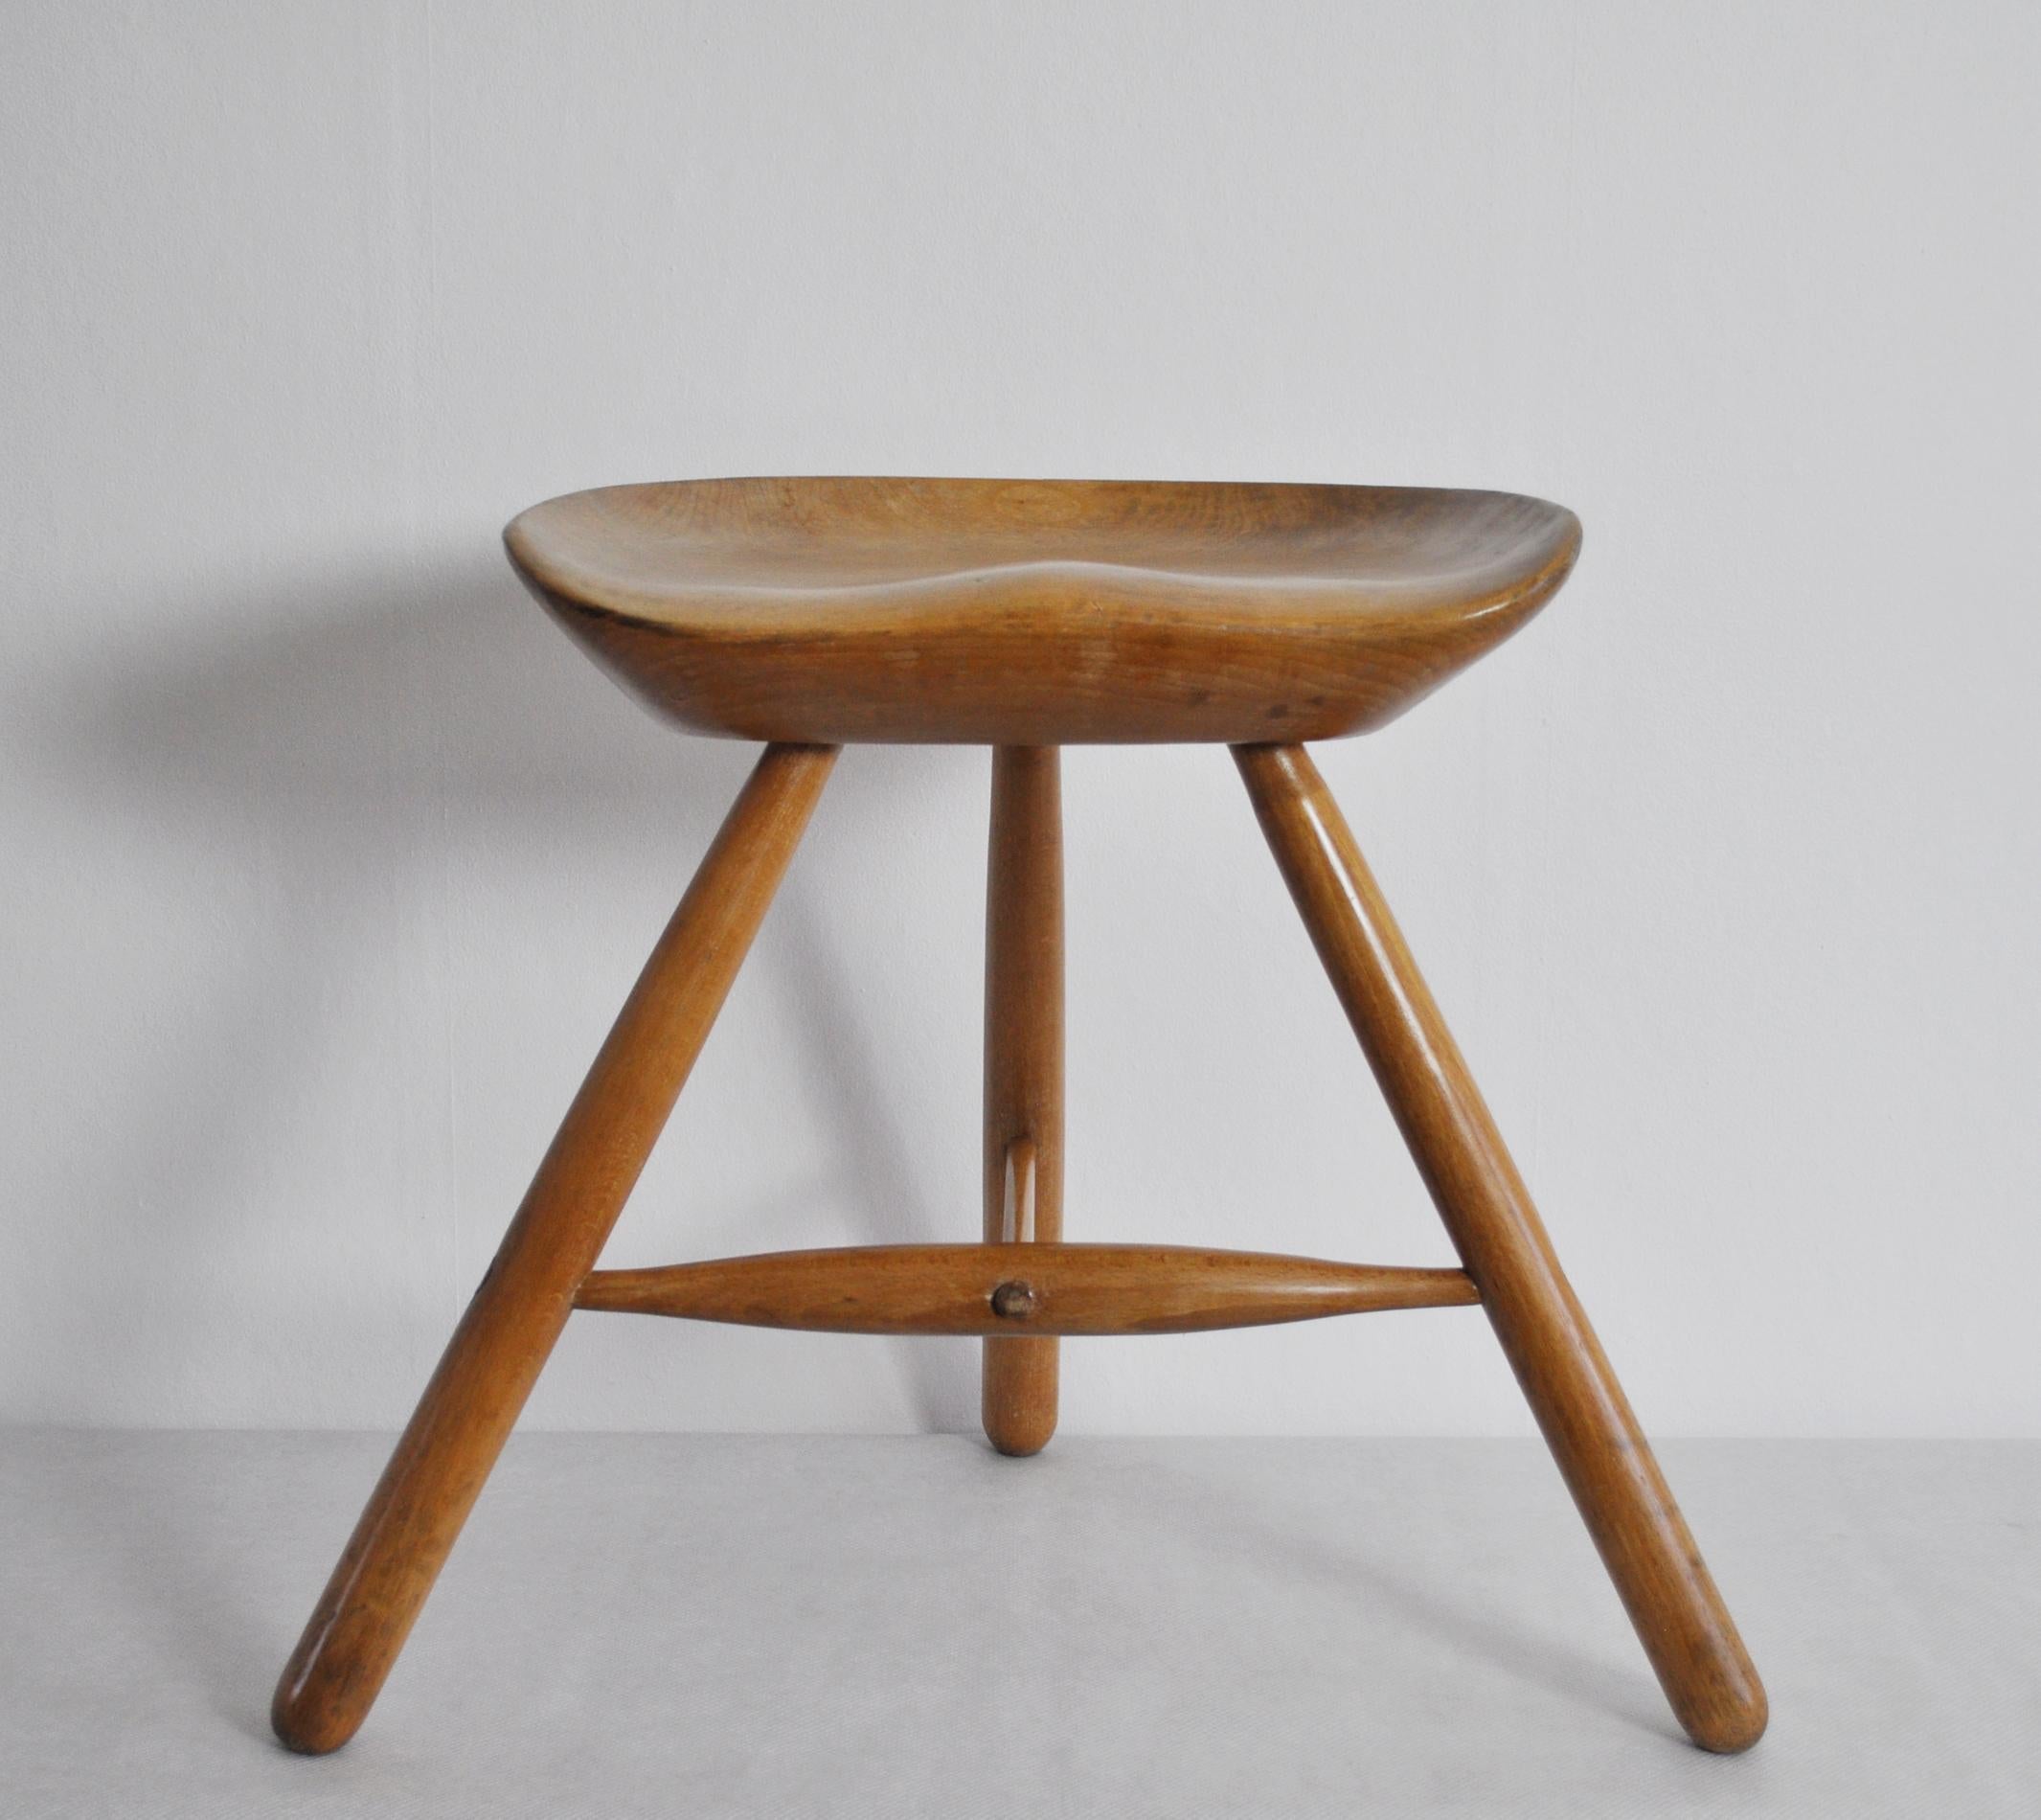 This recognizable stool was designed by Arne Hovmand-Olsen in Denmark, circa 1950. It has three dispersed solid beech legs with a hand carved sculptural solid beech seat. Very fine craftsmanship.
It has a warm brown wooden color with patination